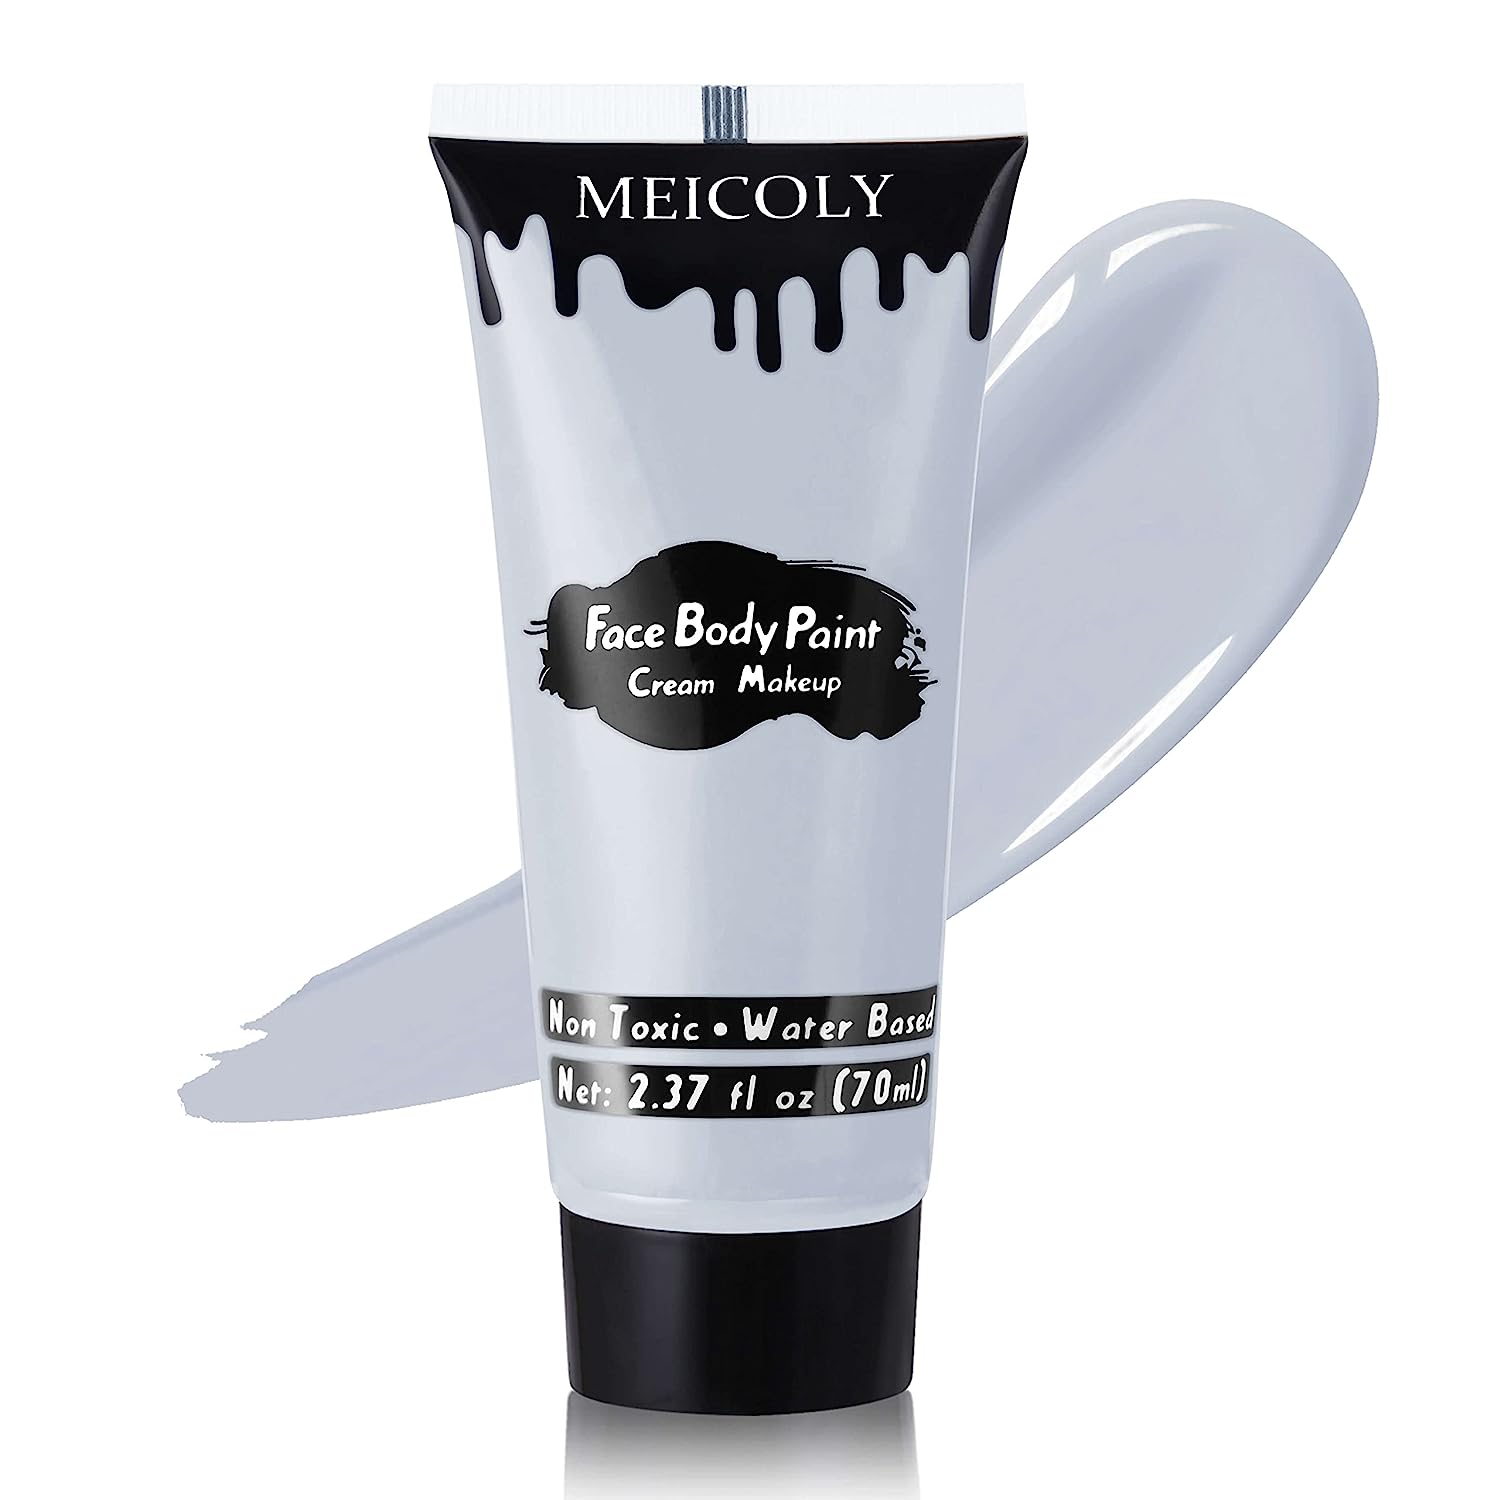 MEICOLY Light Grey Cream Face Body Paint, Large Tube [...]